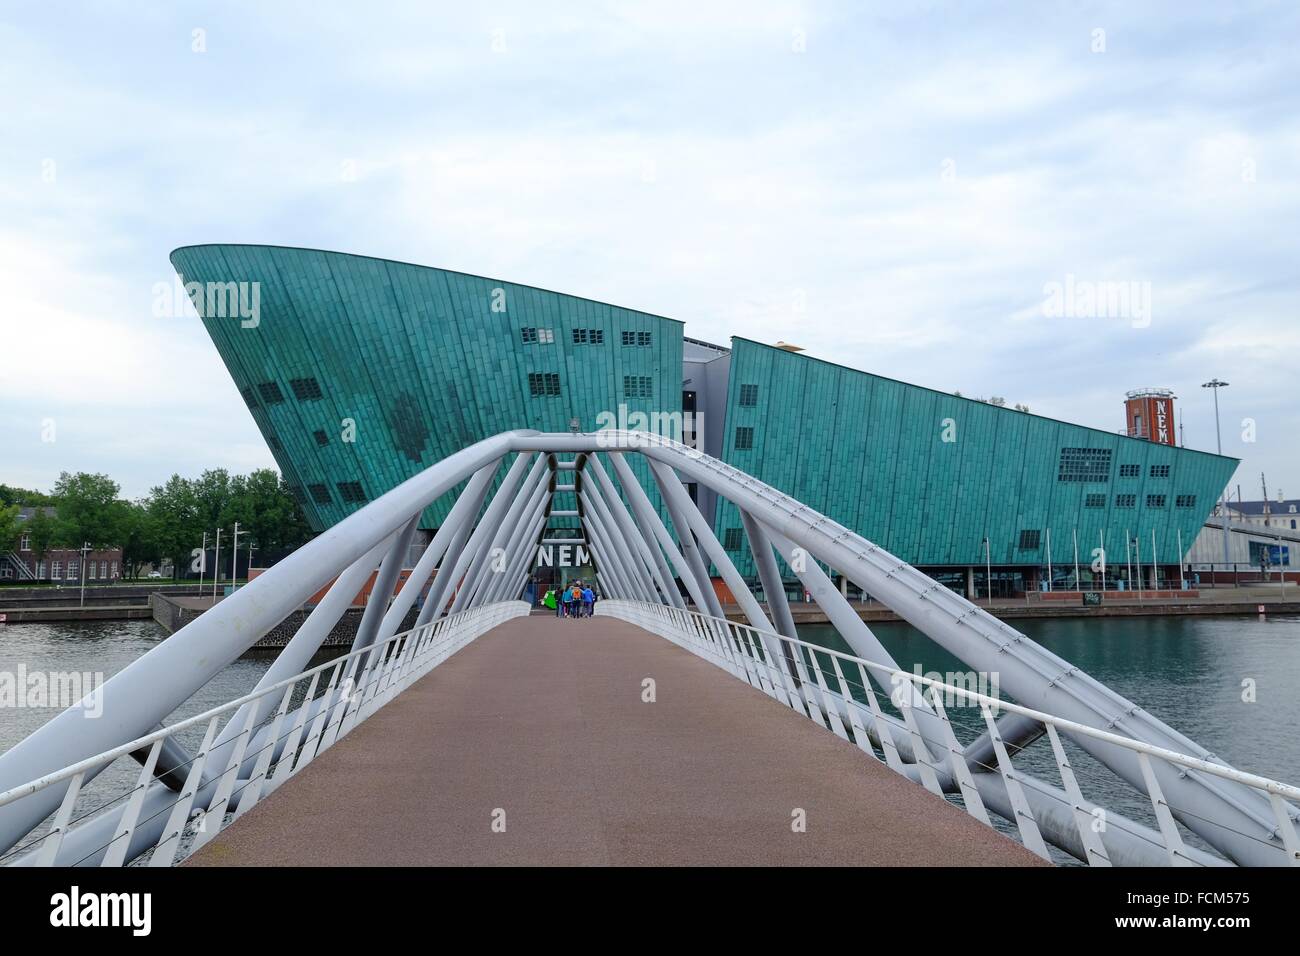 NEMO Science Center, the museum is housed in a ship shape building designed  by Renzo Piano, Amsterdam, The Netherlands, Europe Stock Photo - Alamy